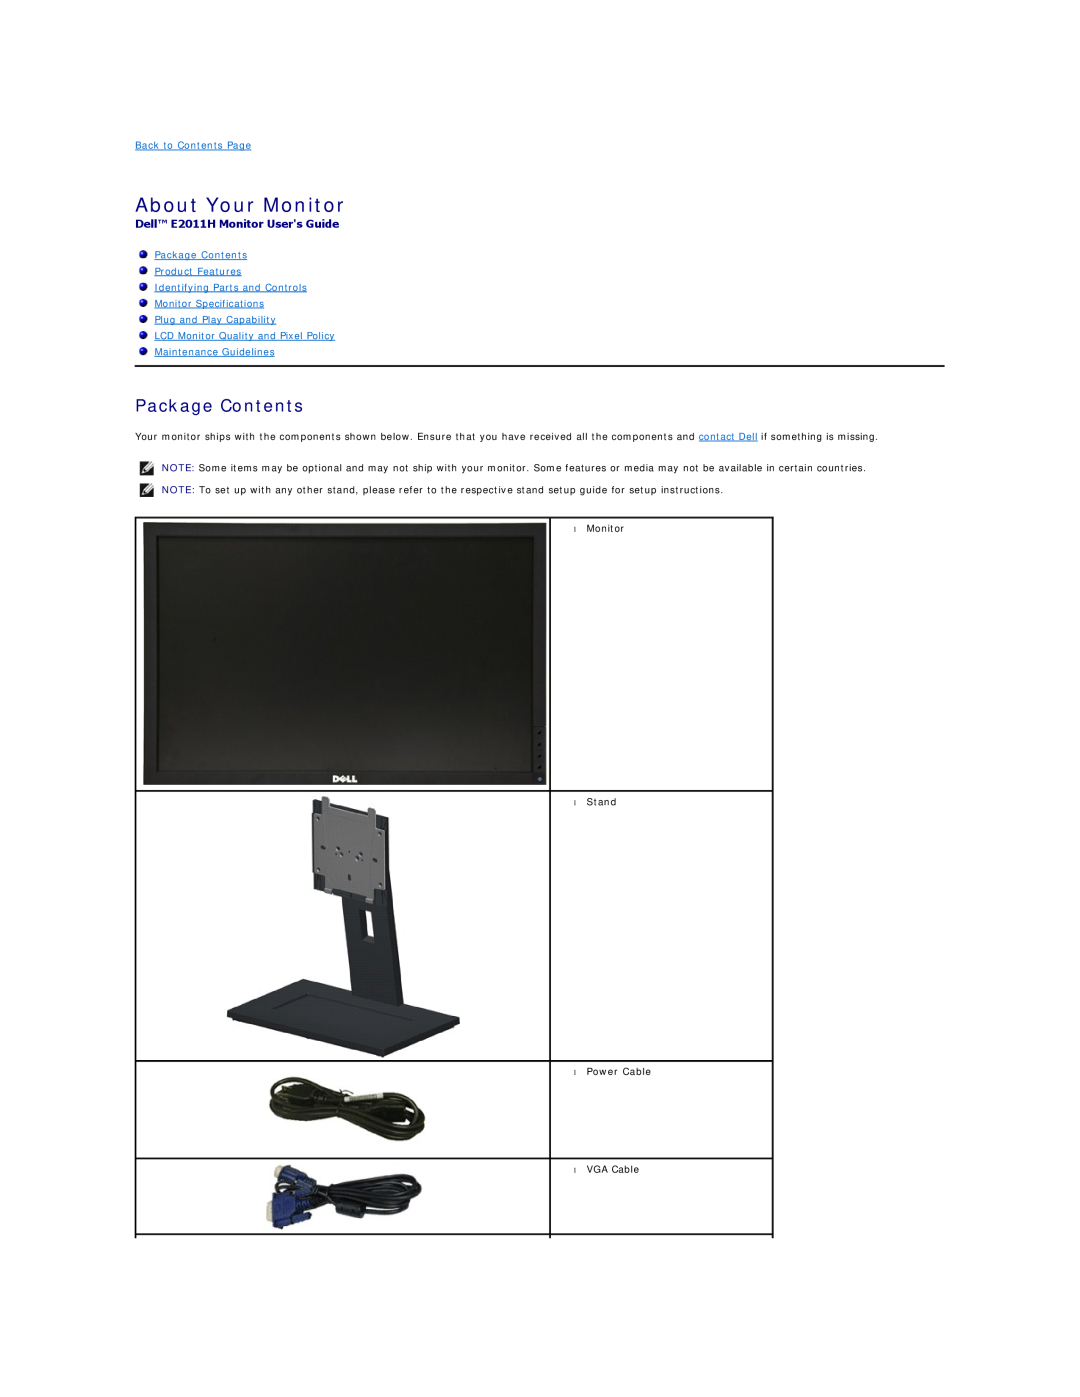 Dell E2011HC appendix About Your Monitor, Package Contents, Dell E2011H Monitor Users Guide, Back to Contents Page 